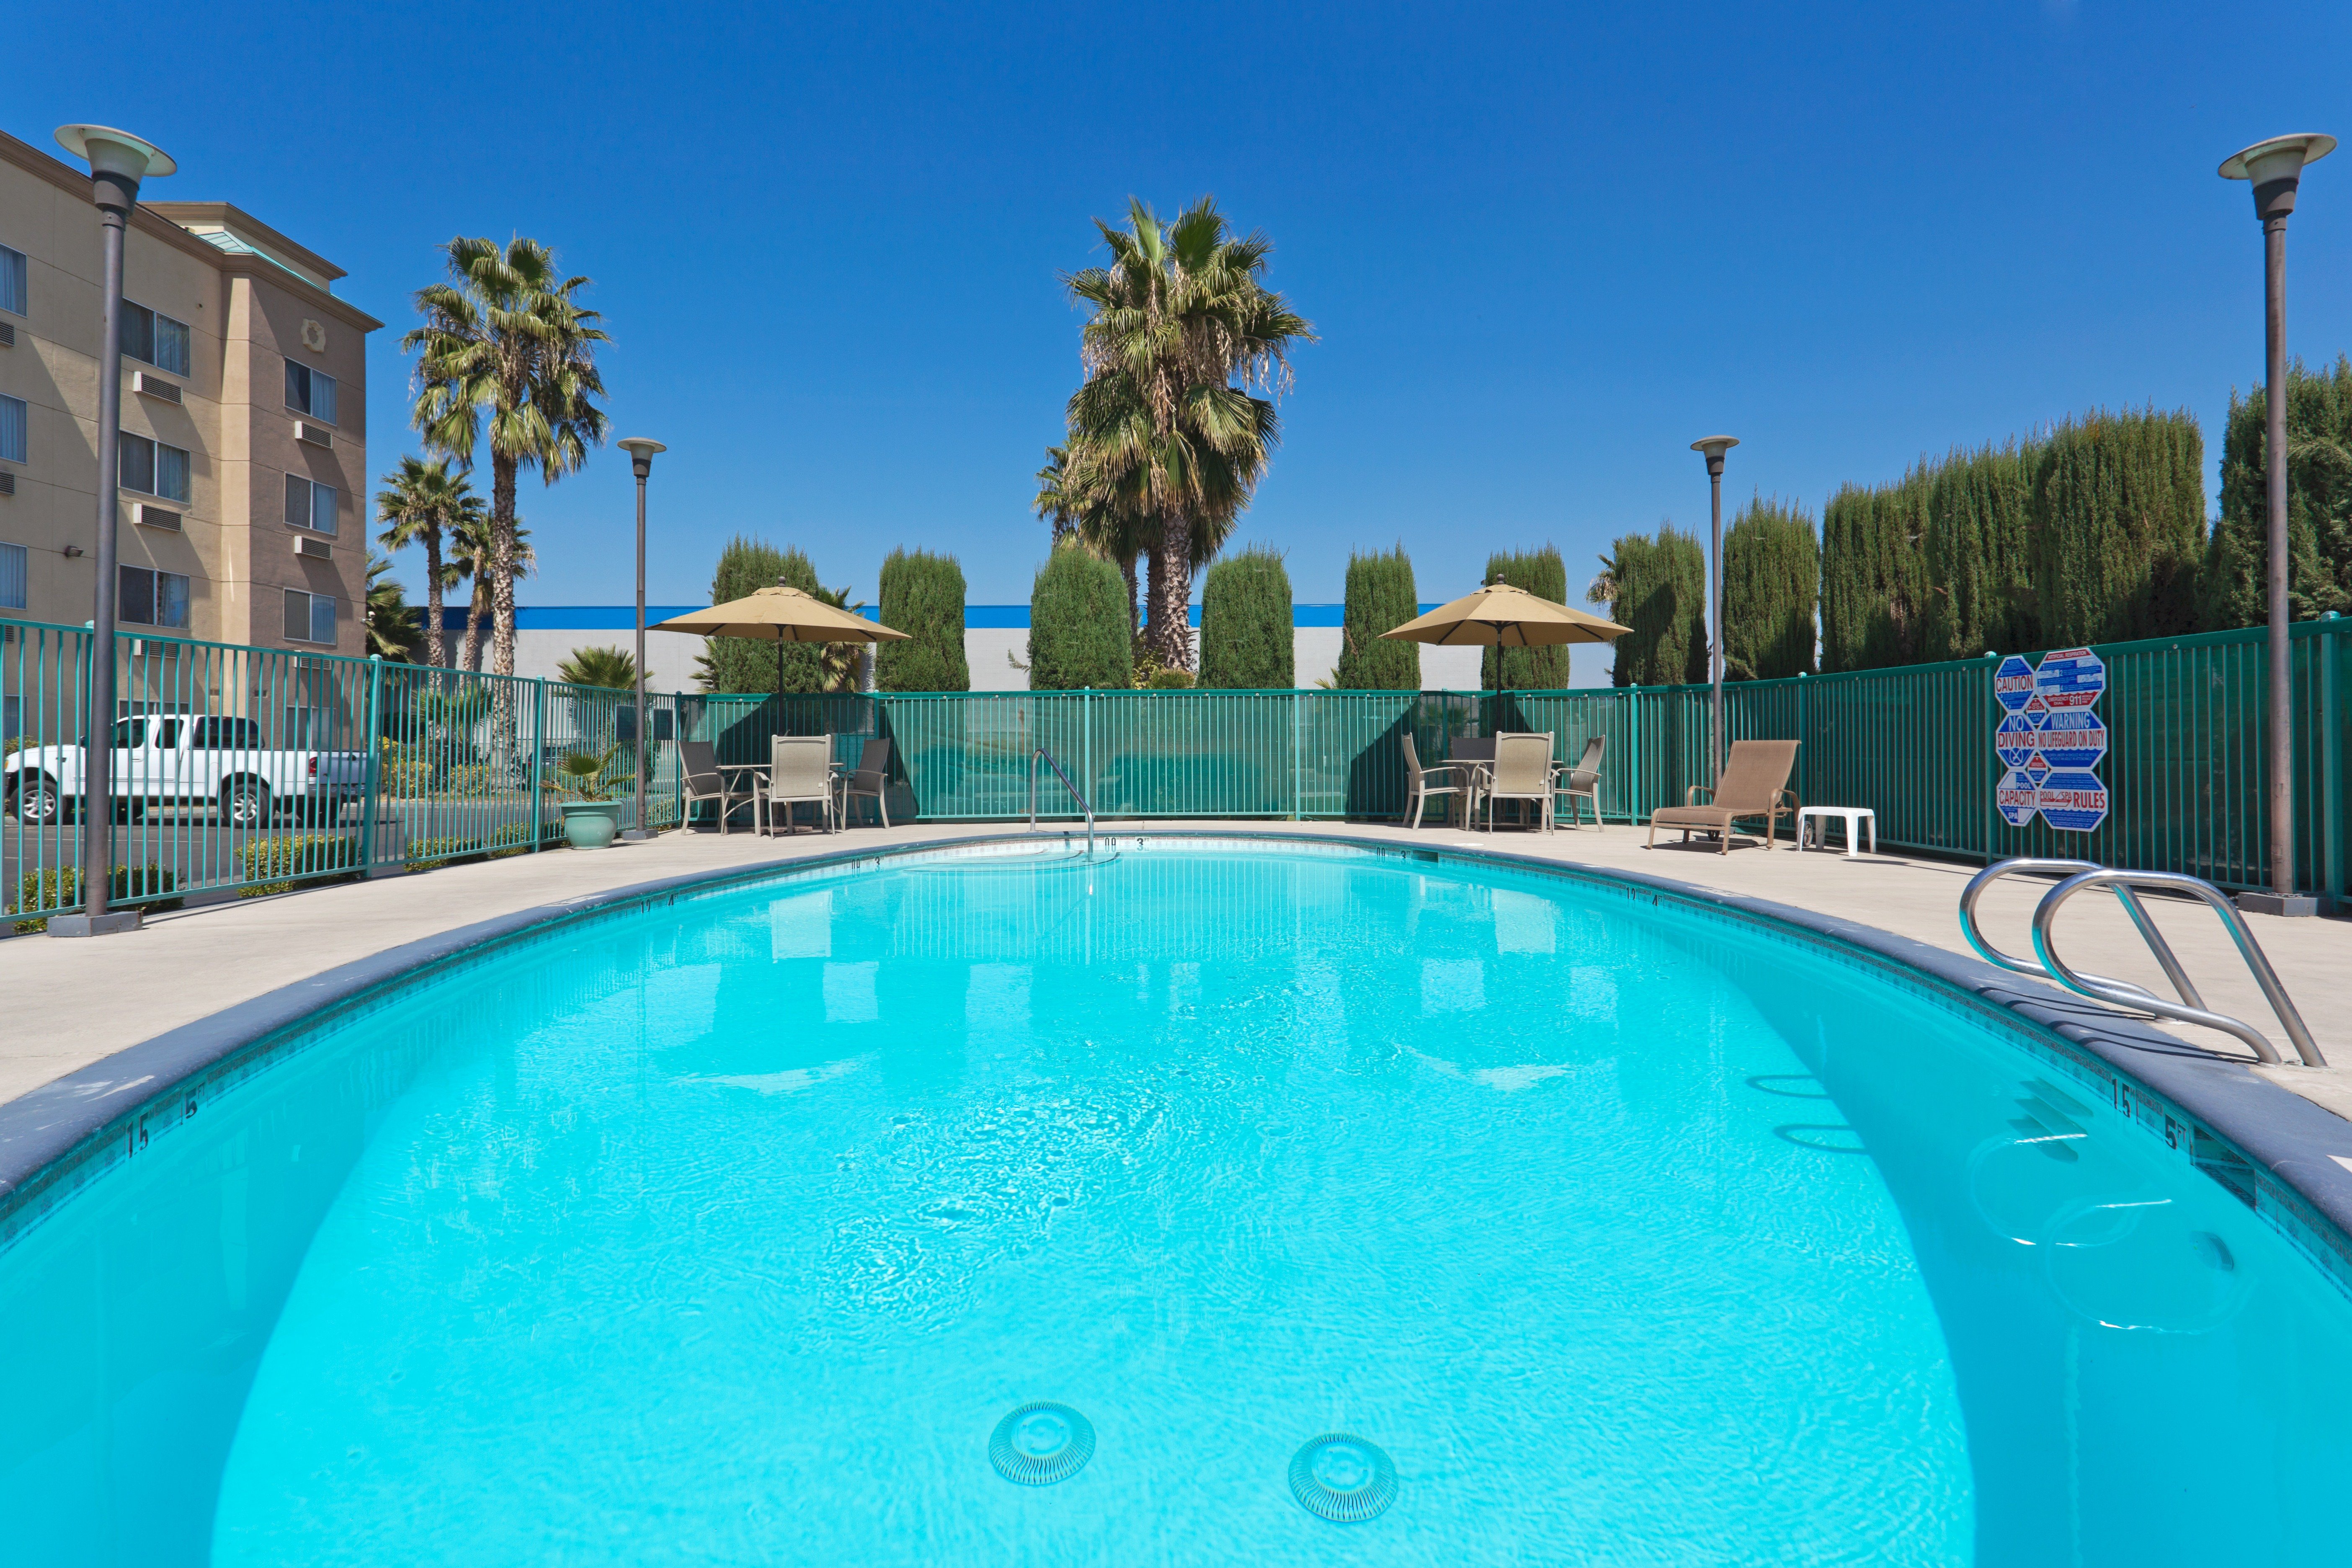 Take a refreshing swim in our Pool